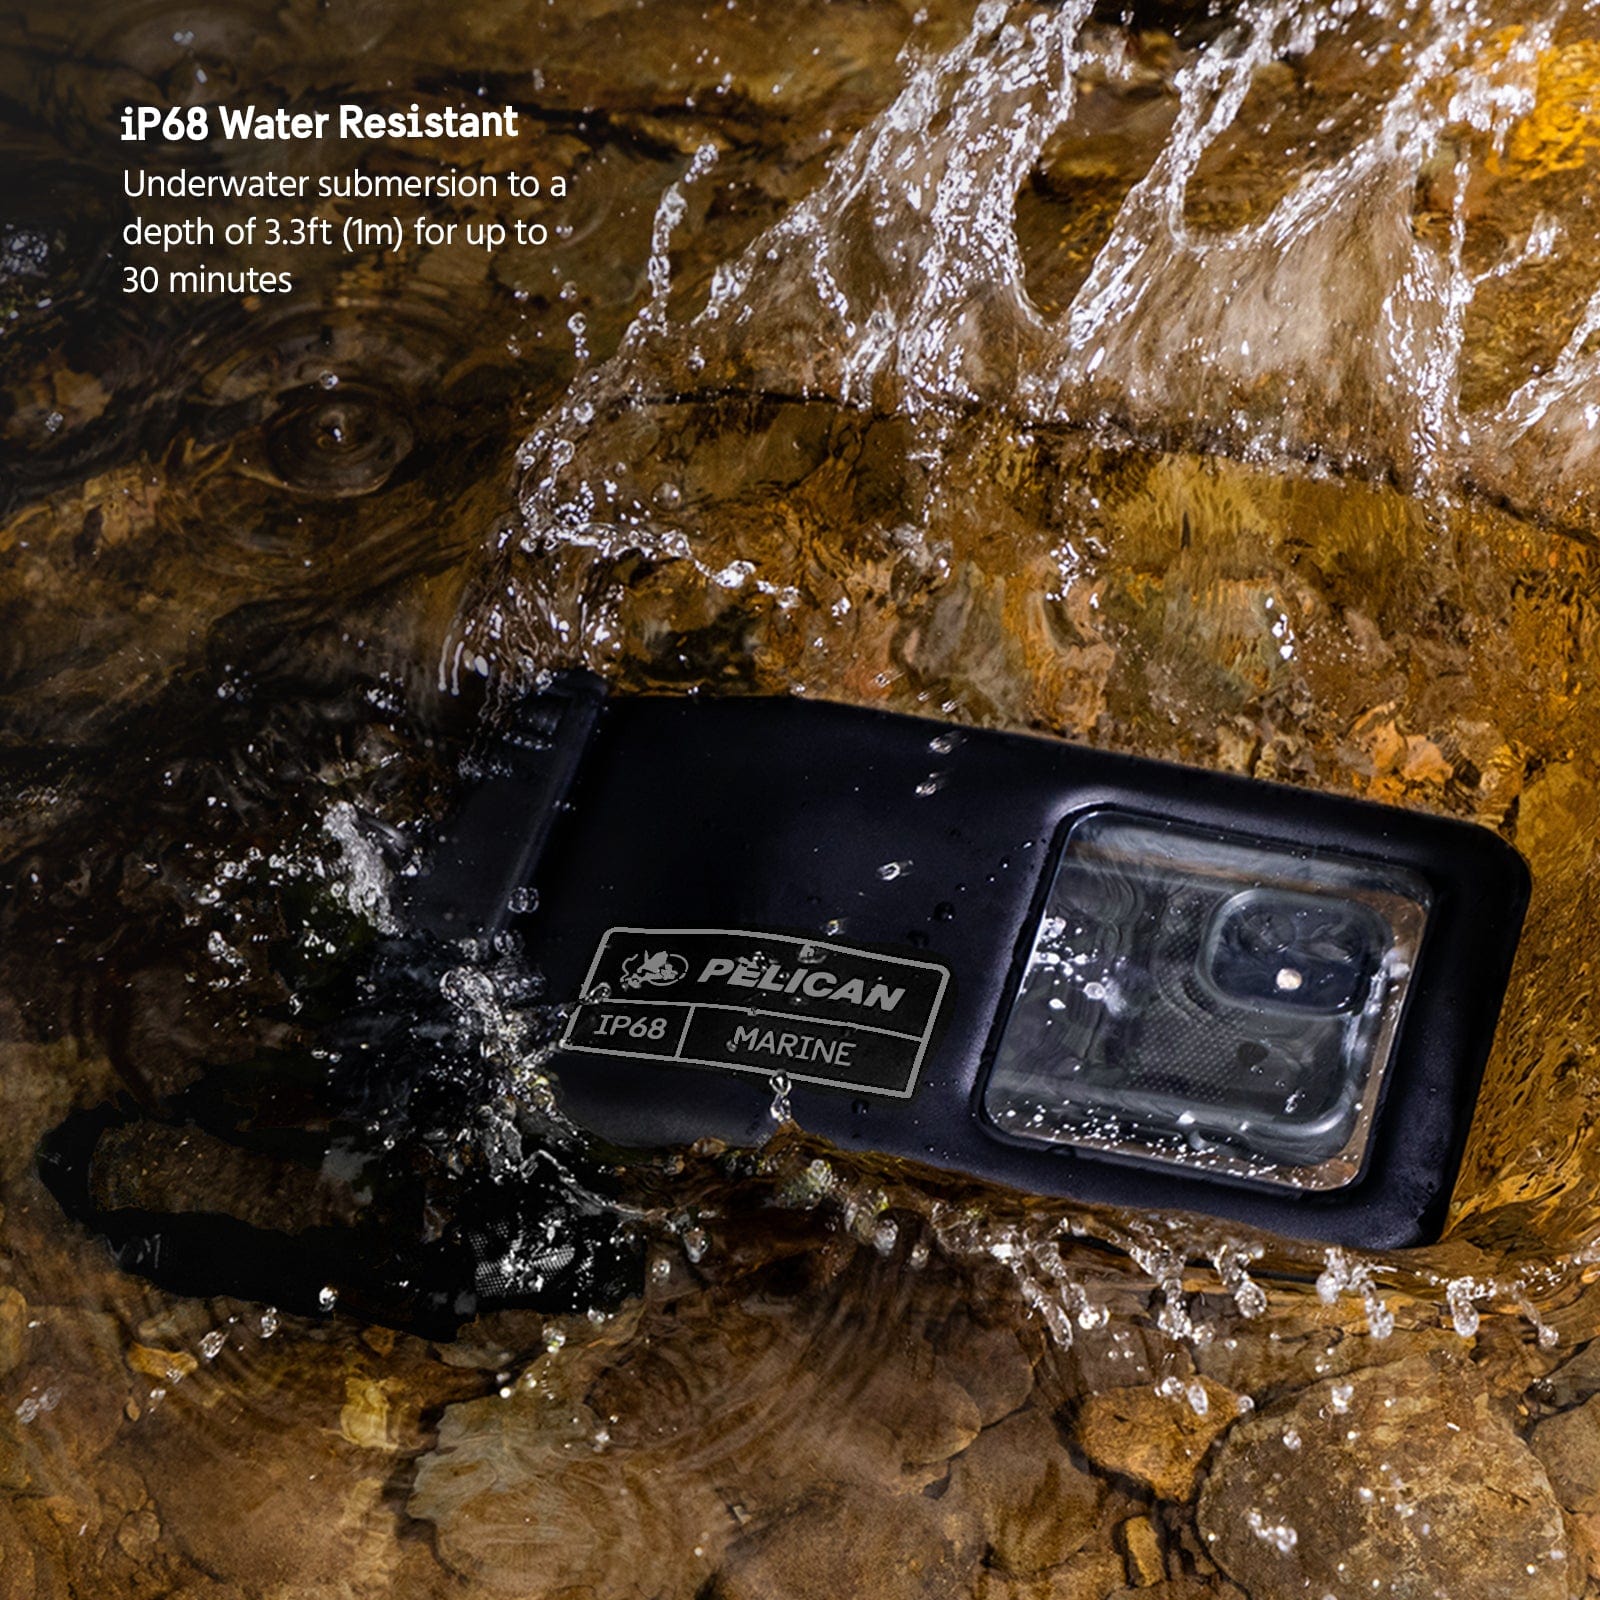 ip68 Water Resistant. Underwater submersion to a depth of 3.3 ft (1m) for up to 30 minutes.